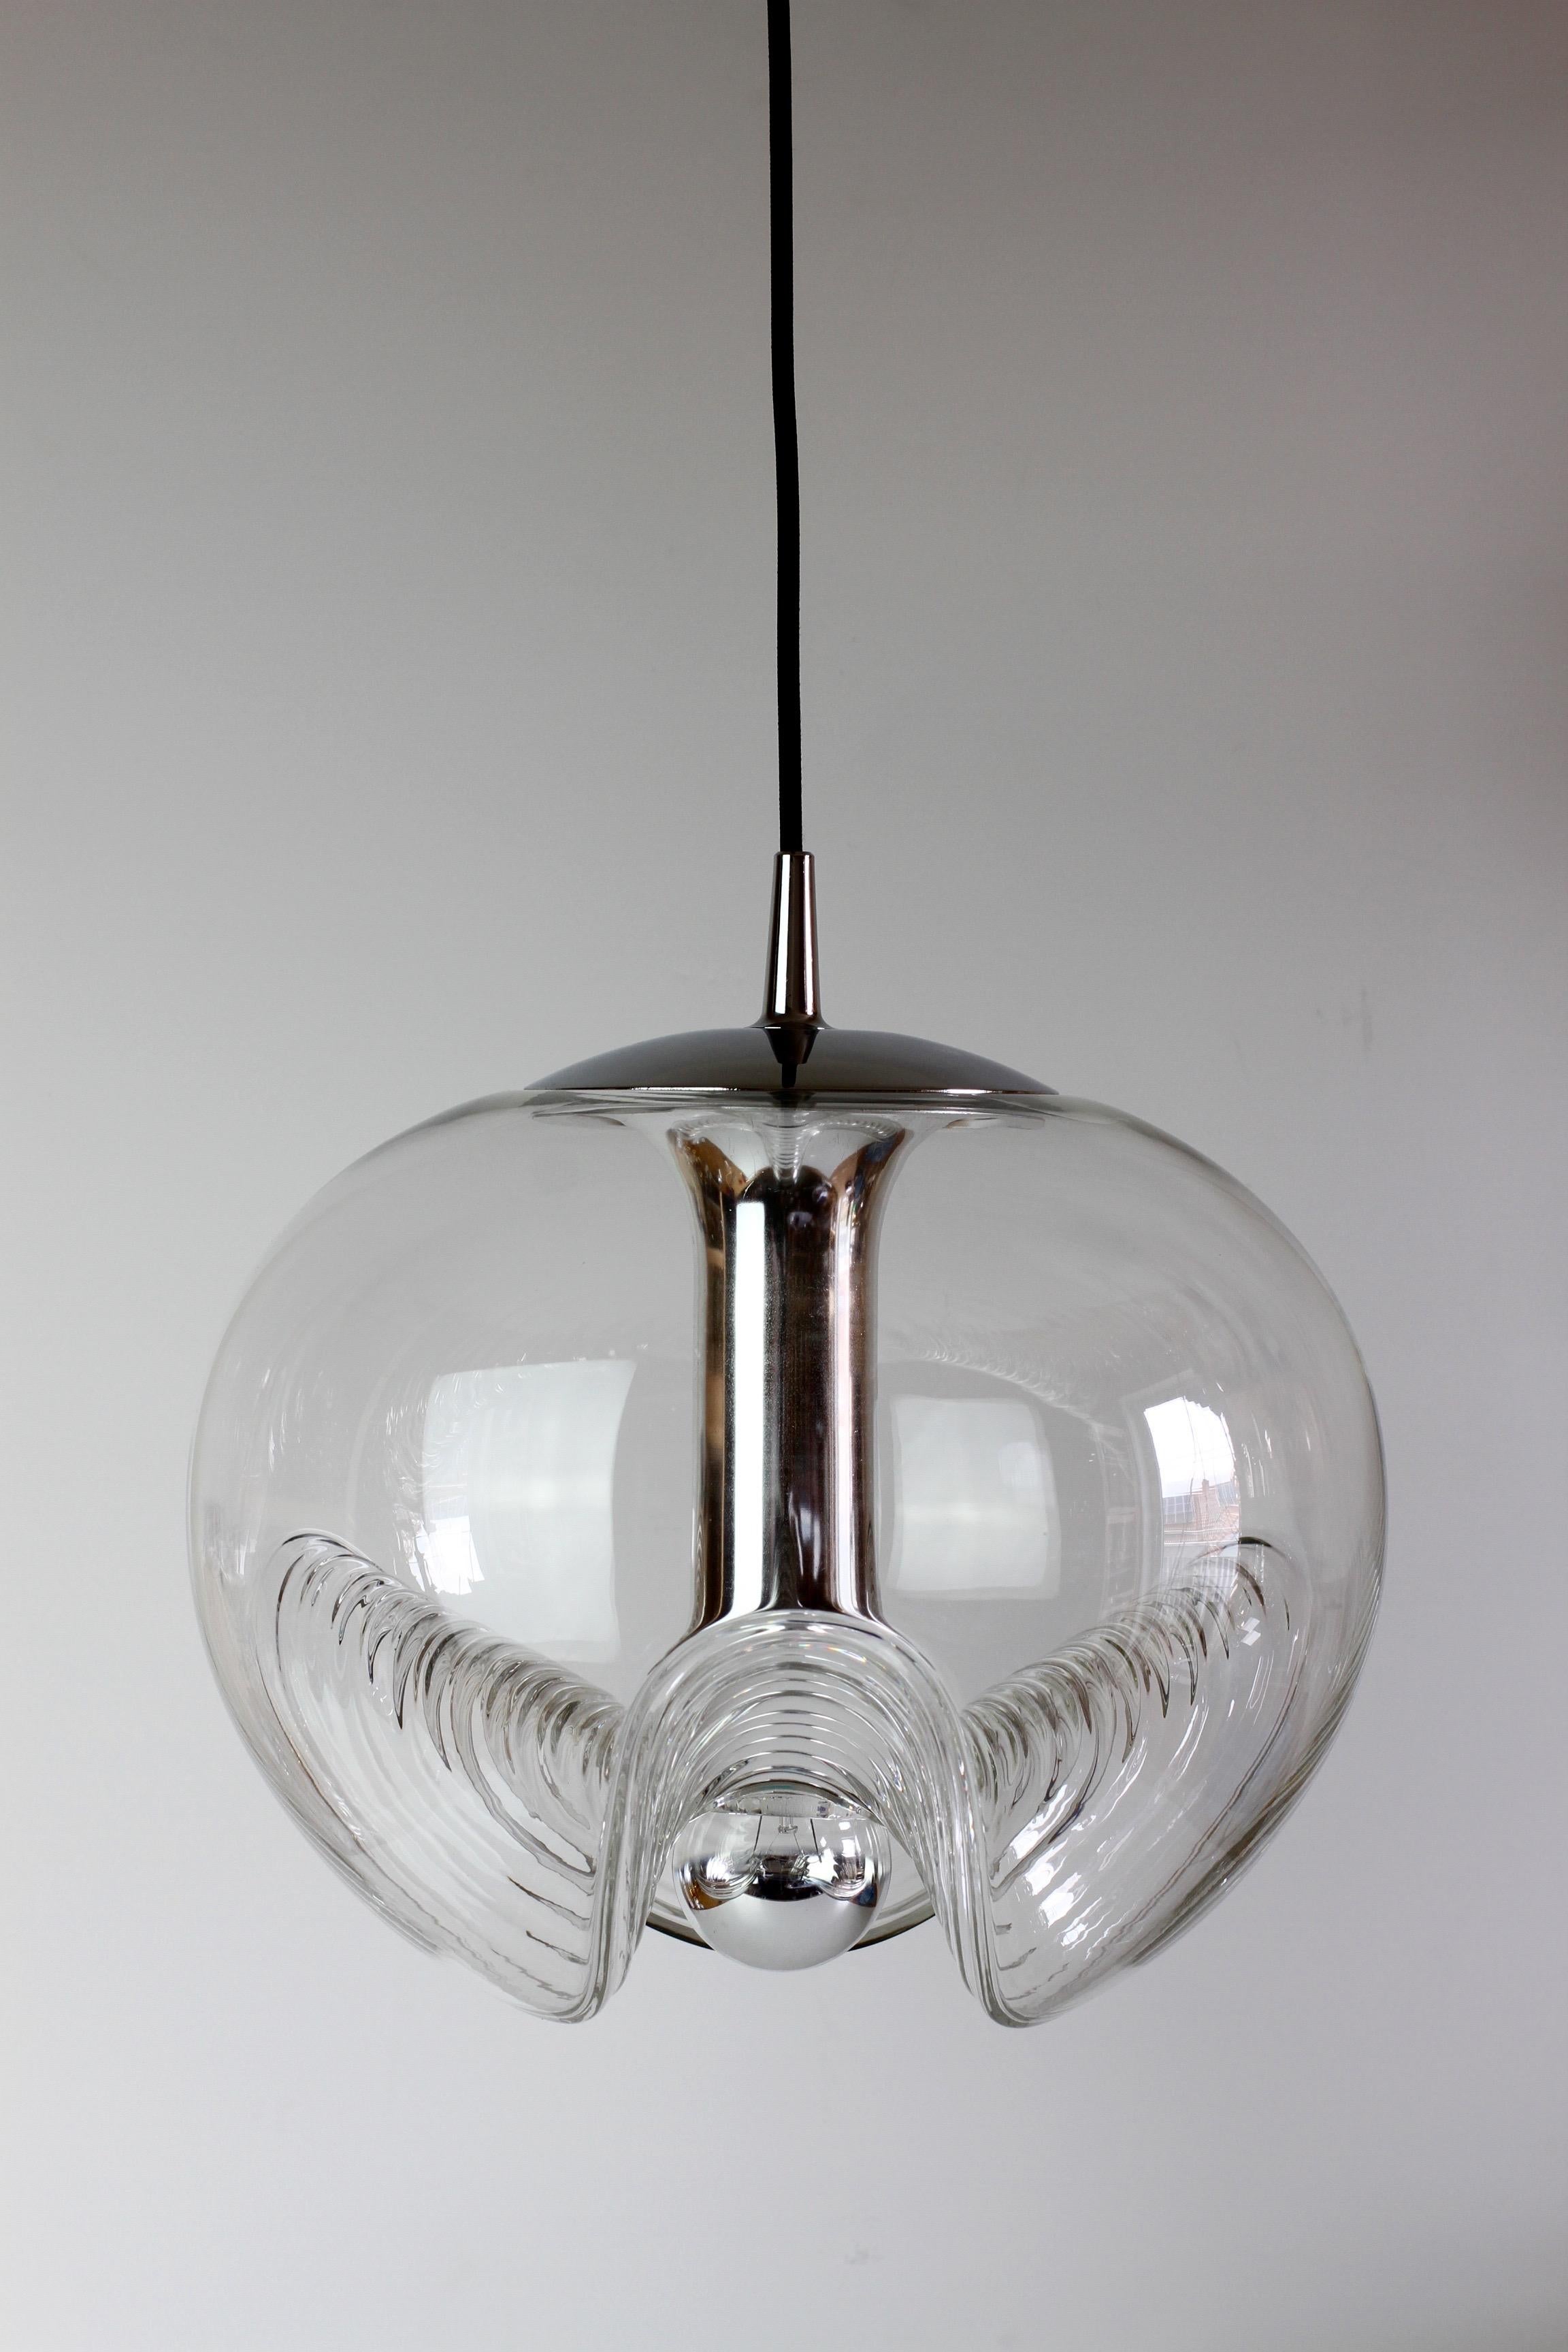 Beautiful mid-century design by iconic German lighting manufacturer Peill & Putzler in the 1970s. This is an absolutely Classic piece of design, featuring a clear glass globe shade with a waved or ribbed molded bubble form, casting a beautiful